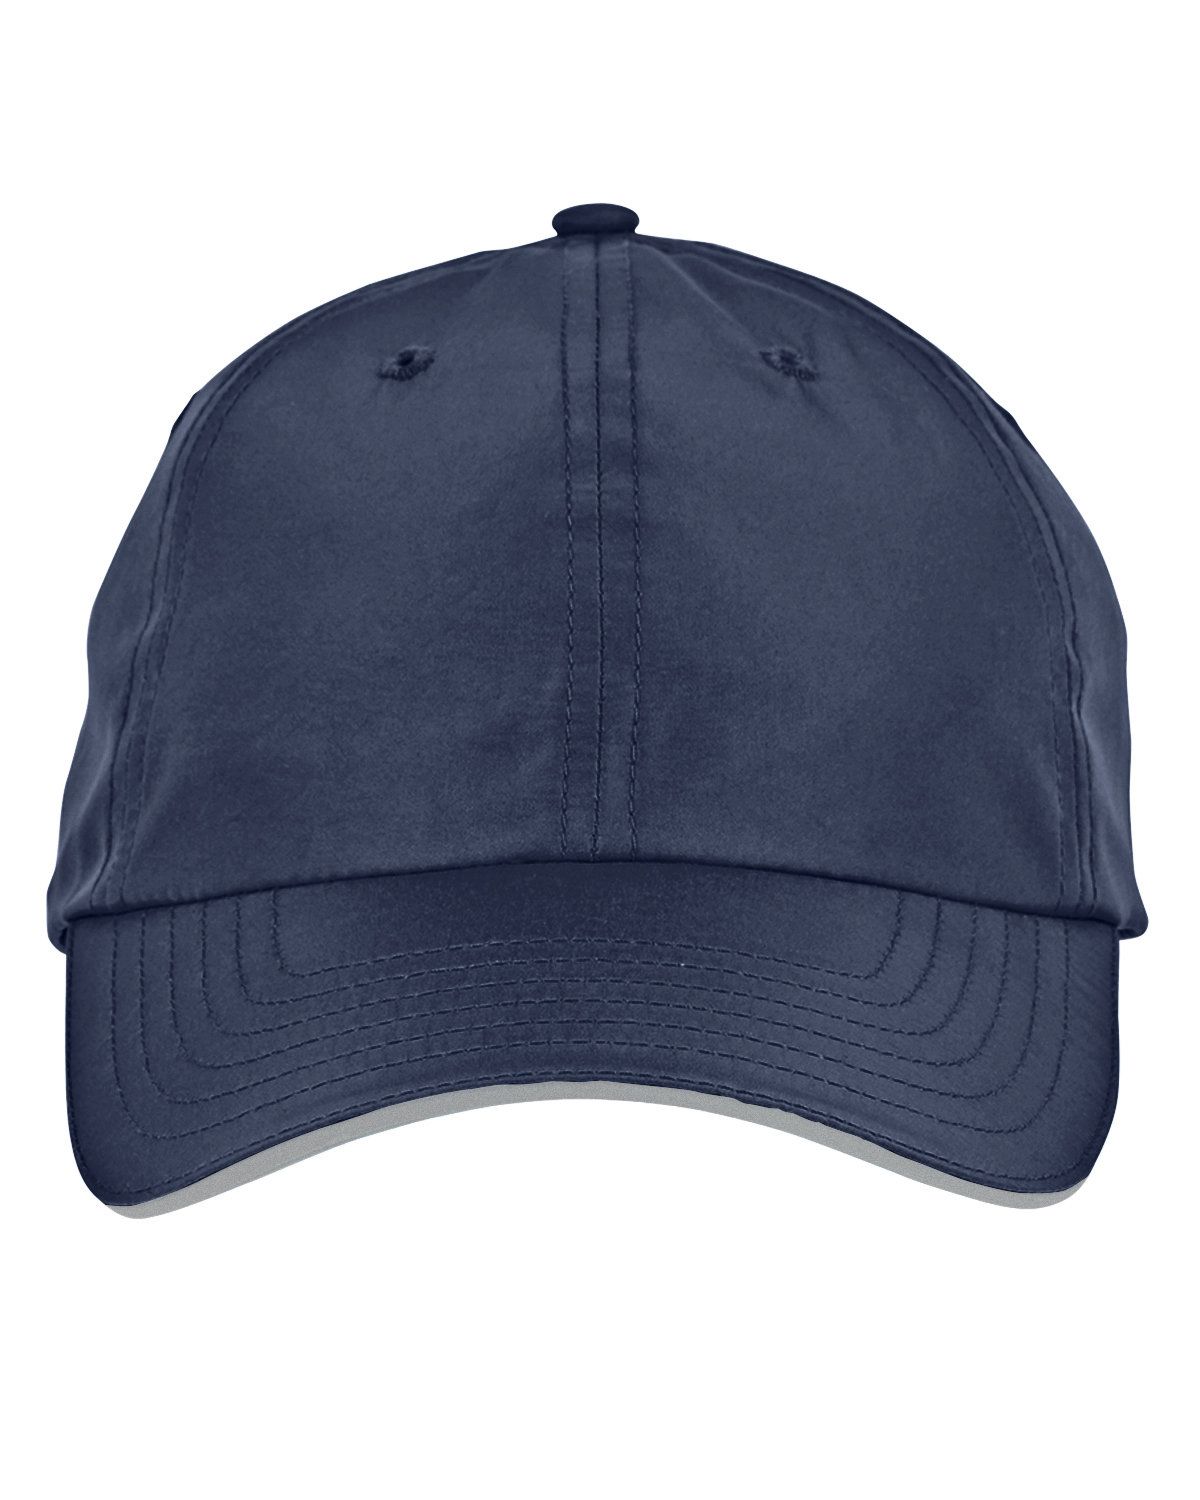 CORE365 Adult Pitch Performance Cap CLASSIC NAVY 